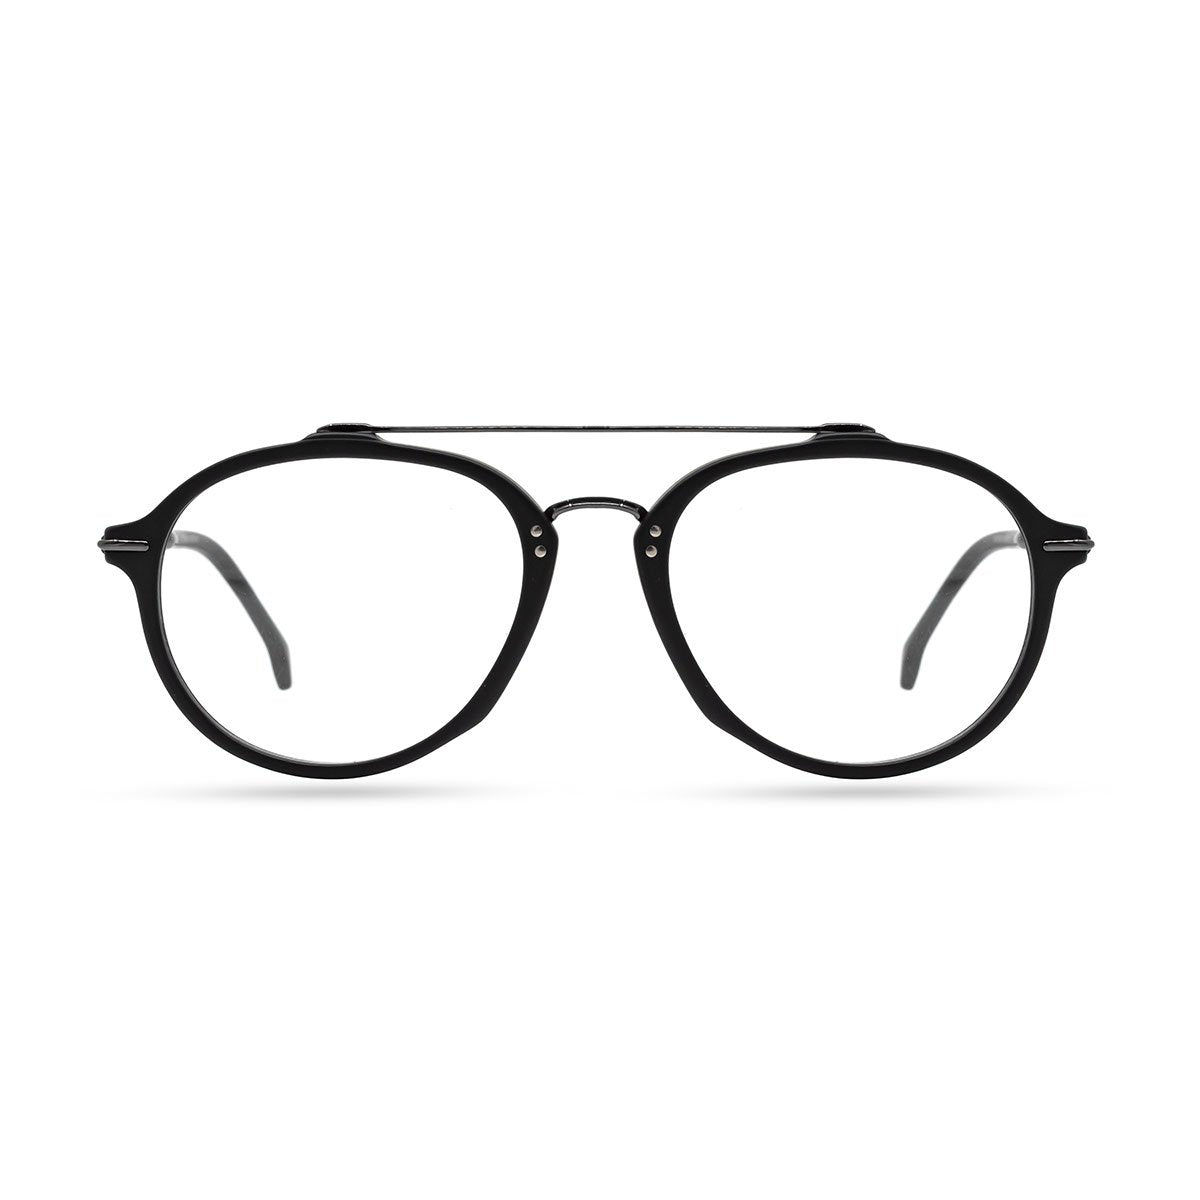 CARRERA 174 3 spectacle-frame